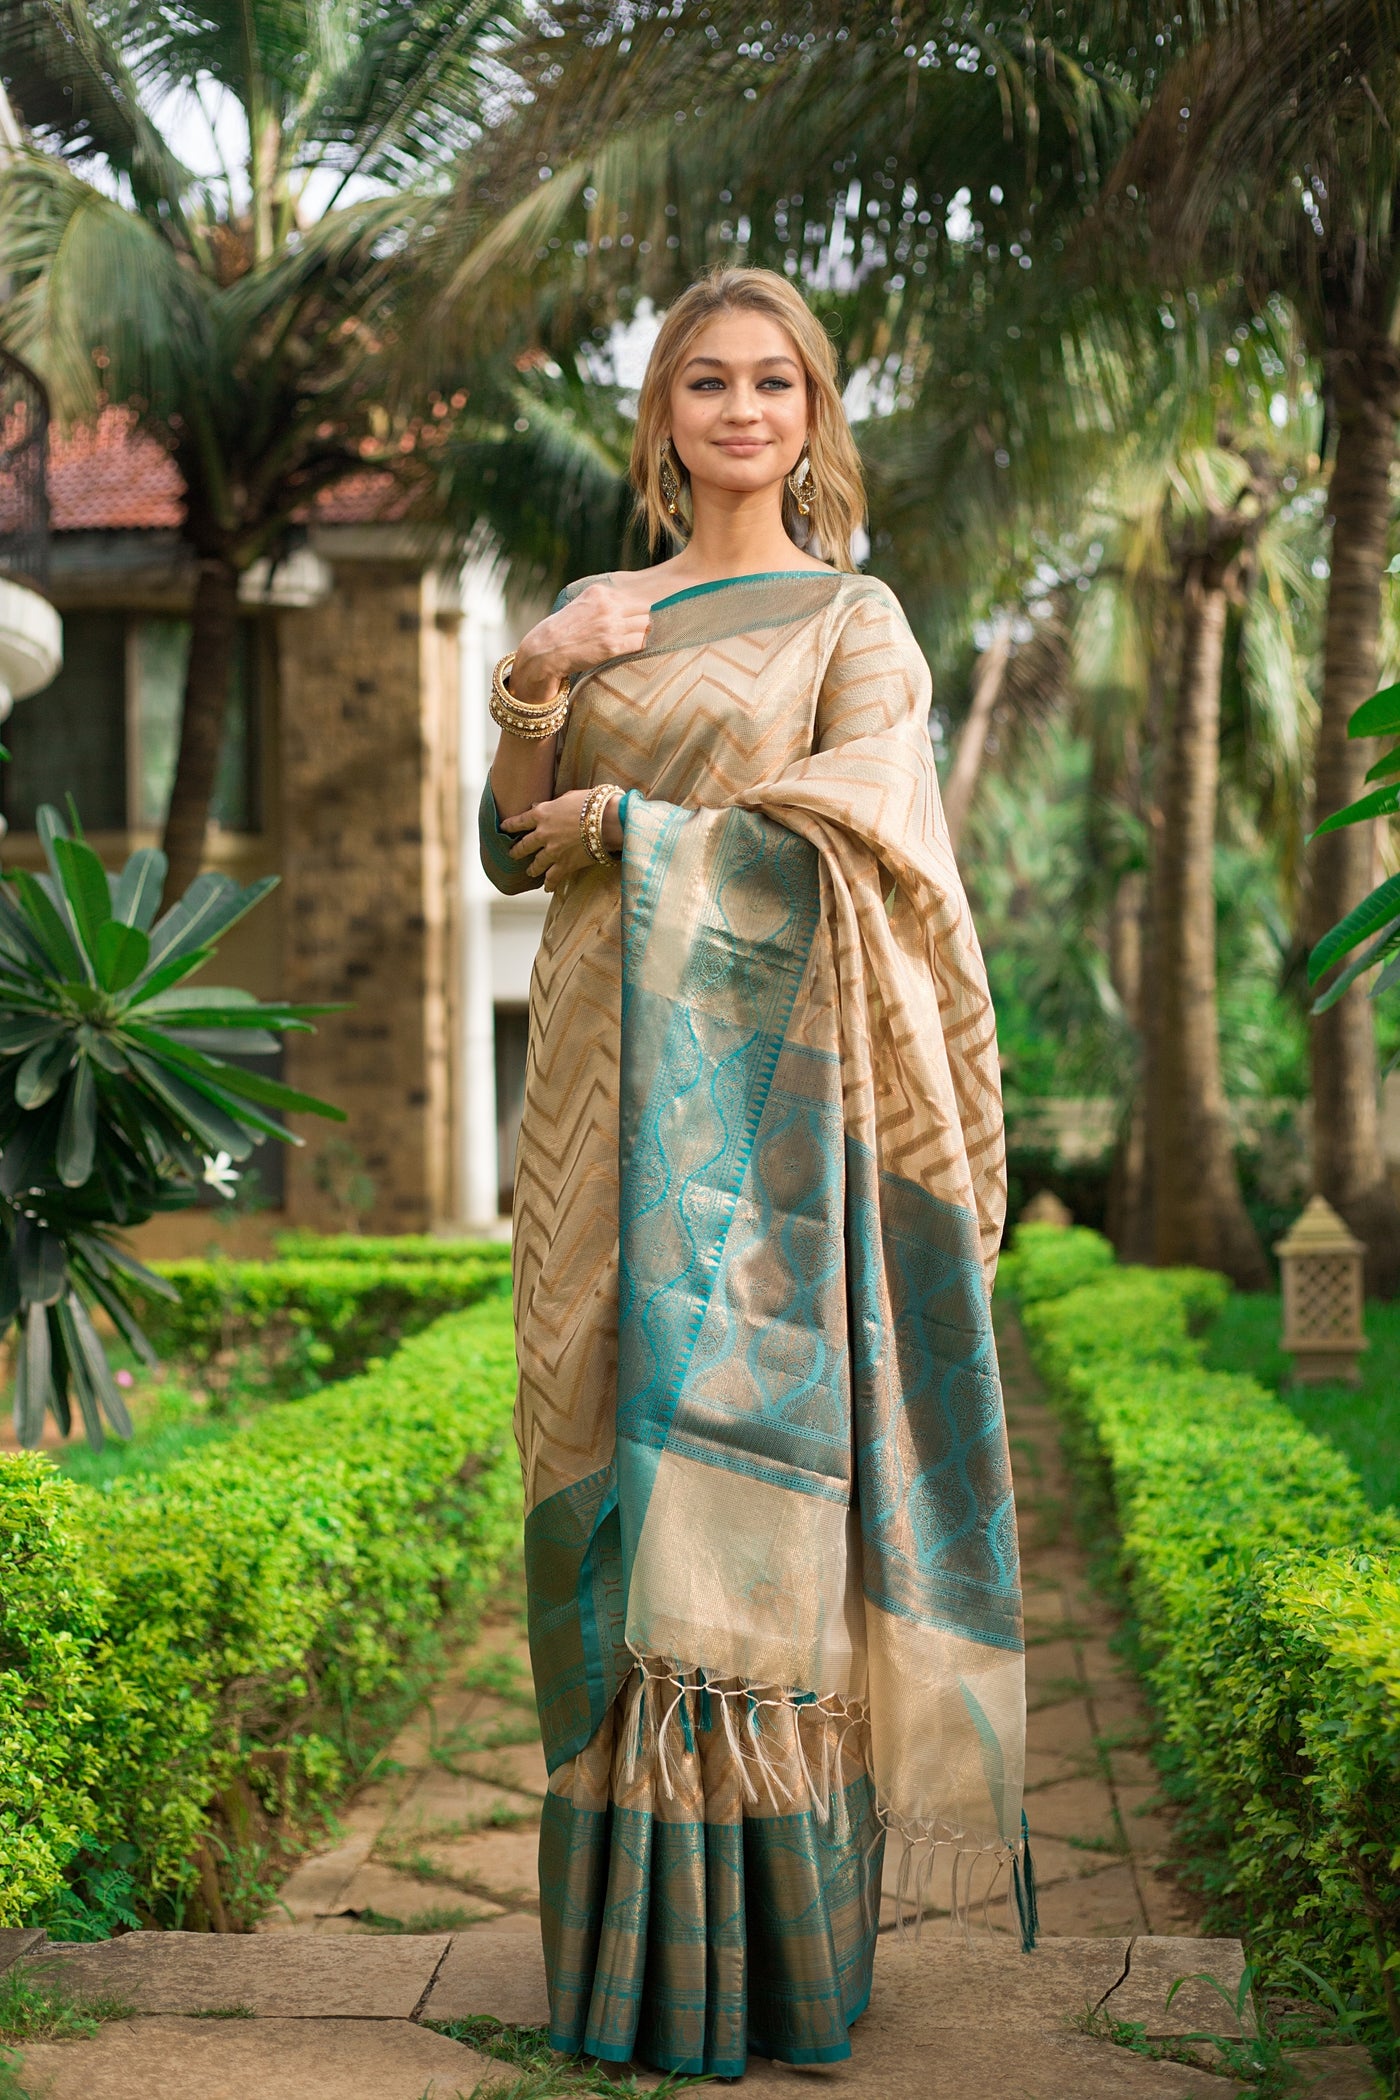 Soft Gold Banarasi Saree Indian Clothing in Denver, CO, Aurora, CO, Boulder, CO, Fort Collins, CO, Colorado Springs, CO, Parker, CO, Highlands Ranch, CO, Cherry Creek, CO, Centennial, CO, and Longmont, CO. NATIONWIDE SHIPPING USA- India Fashion X